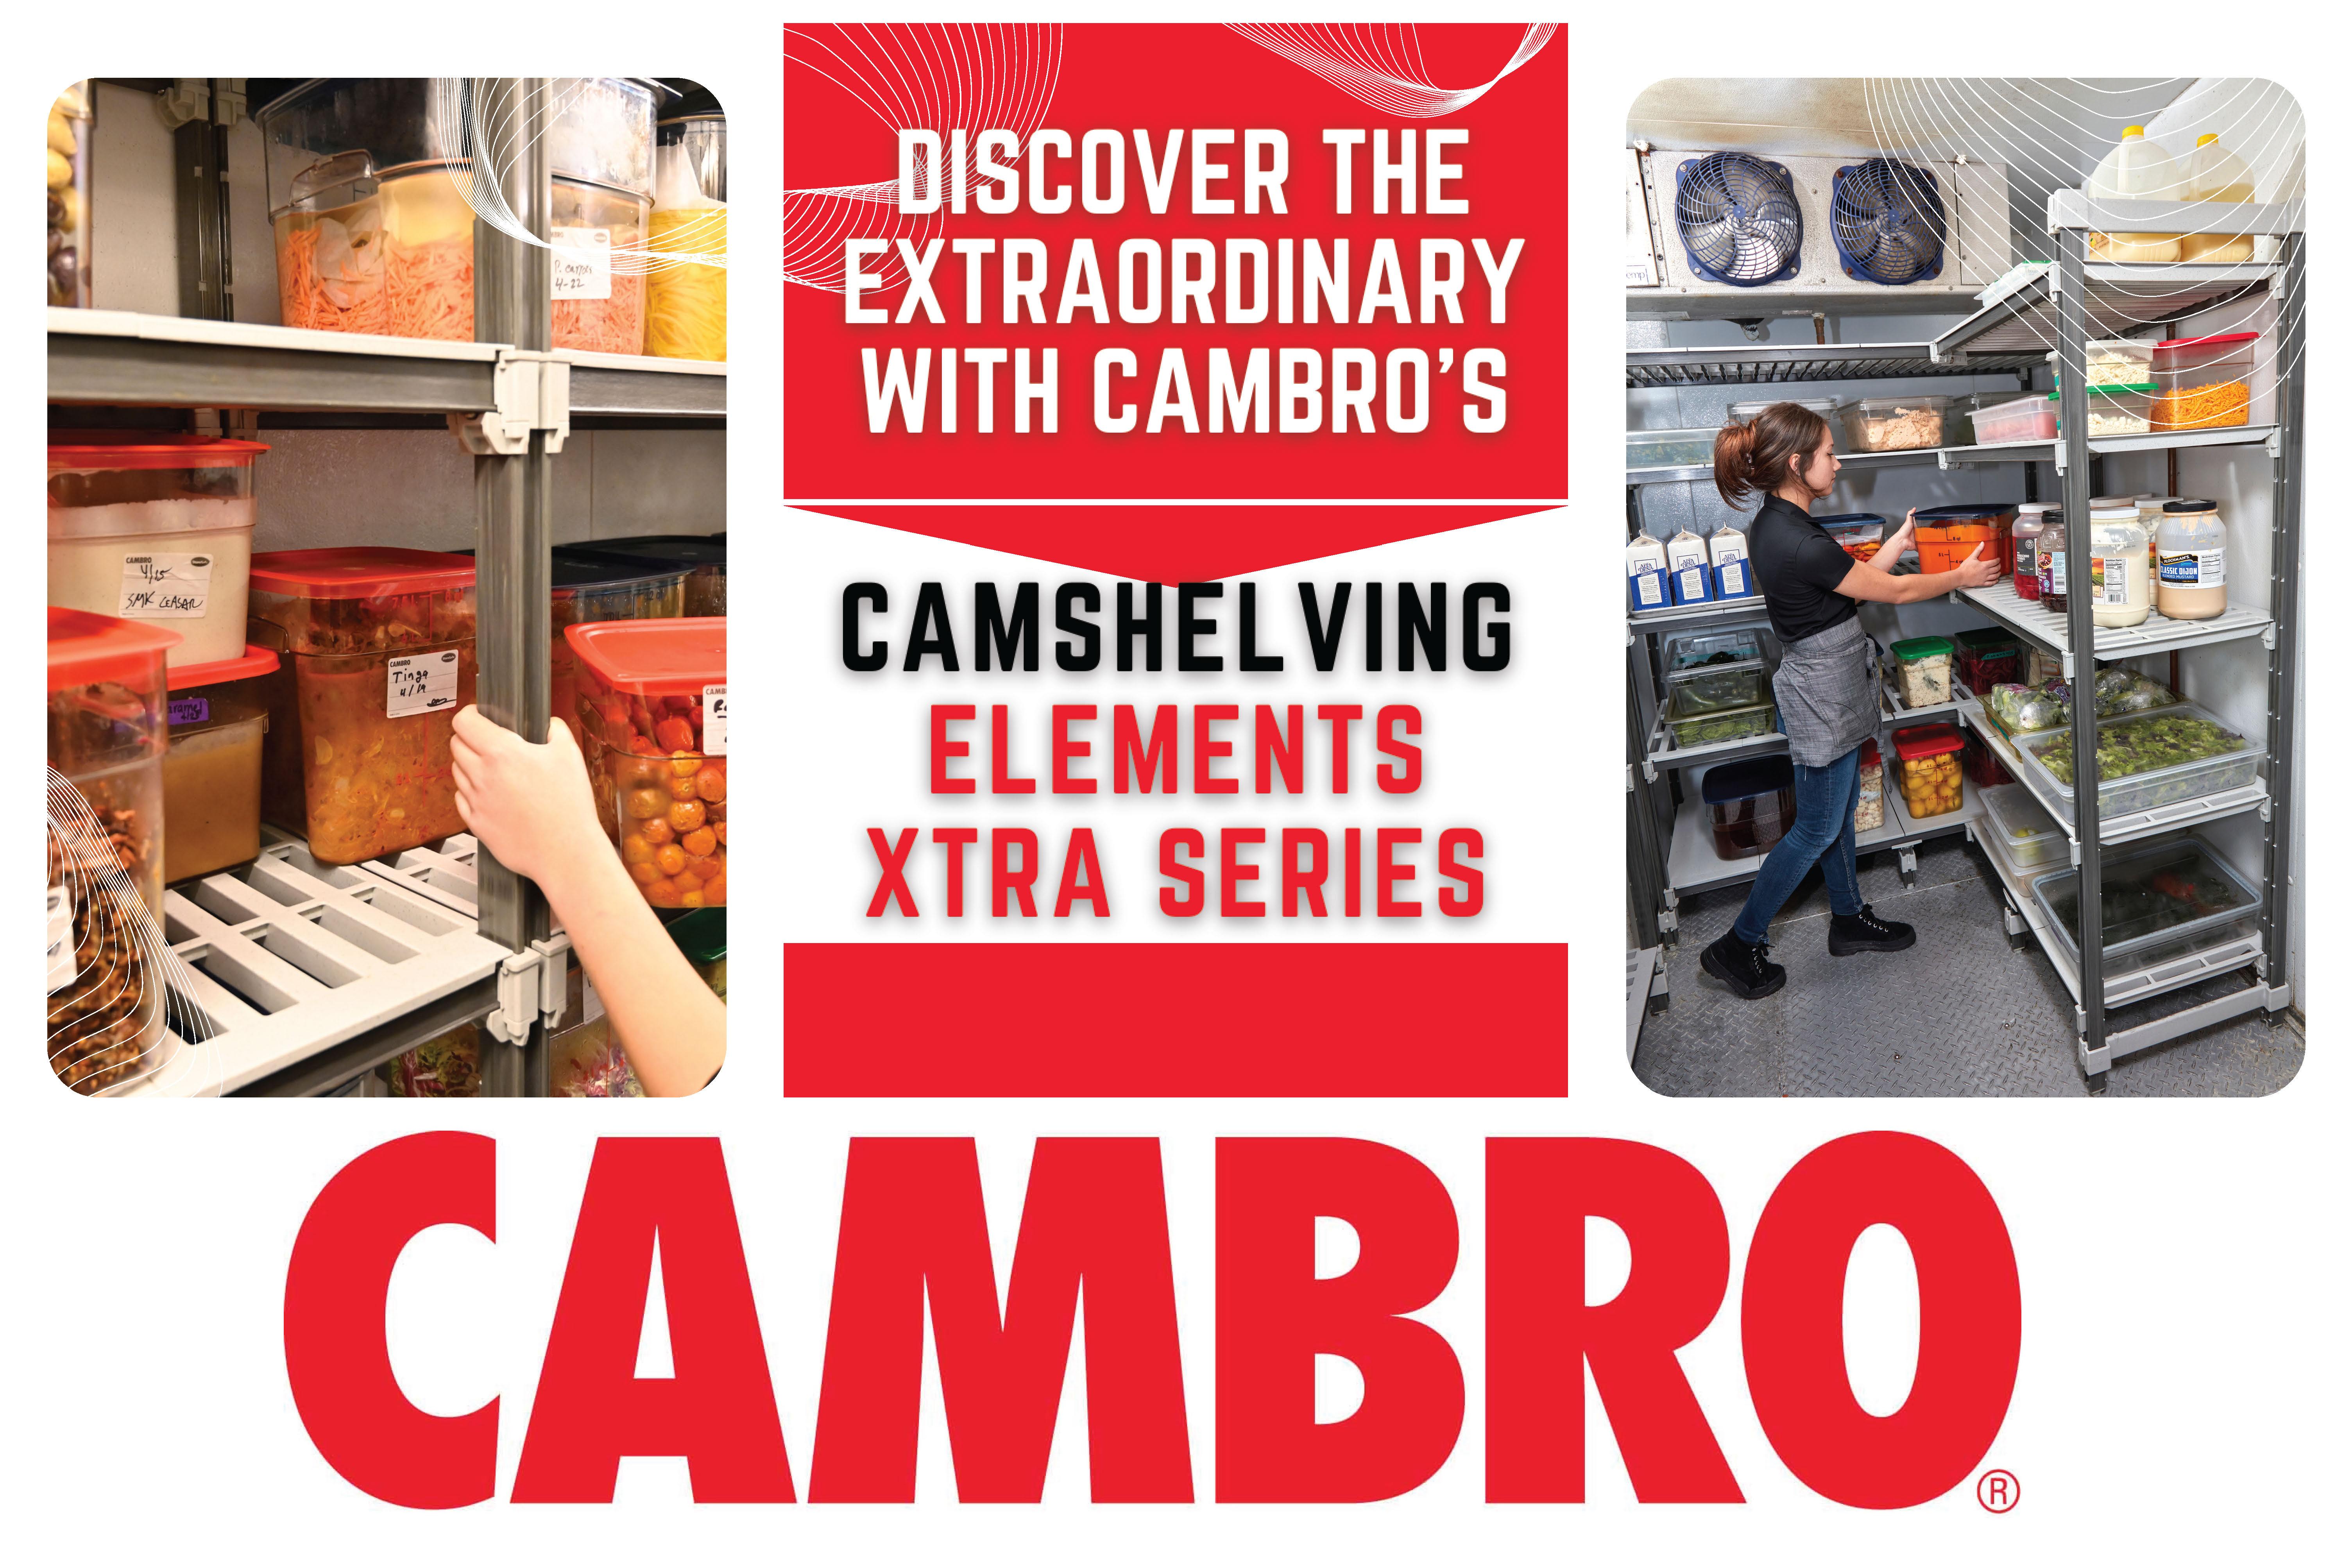 Discover the Extraordinary with Cambro's Camshelving Elements XTRA Series